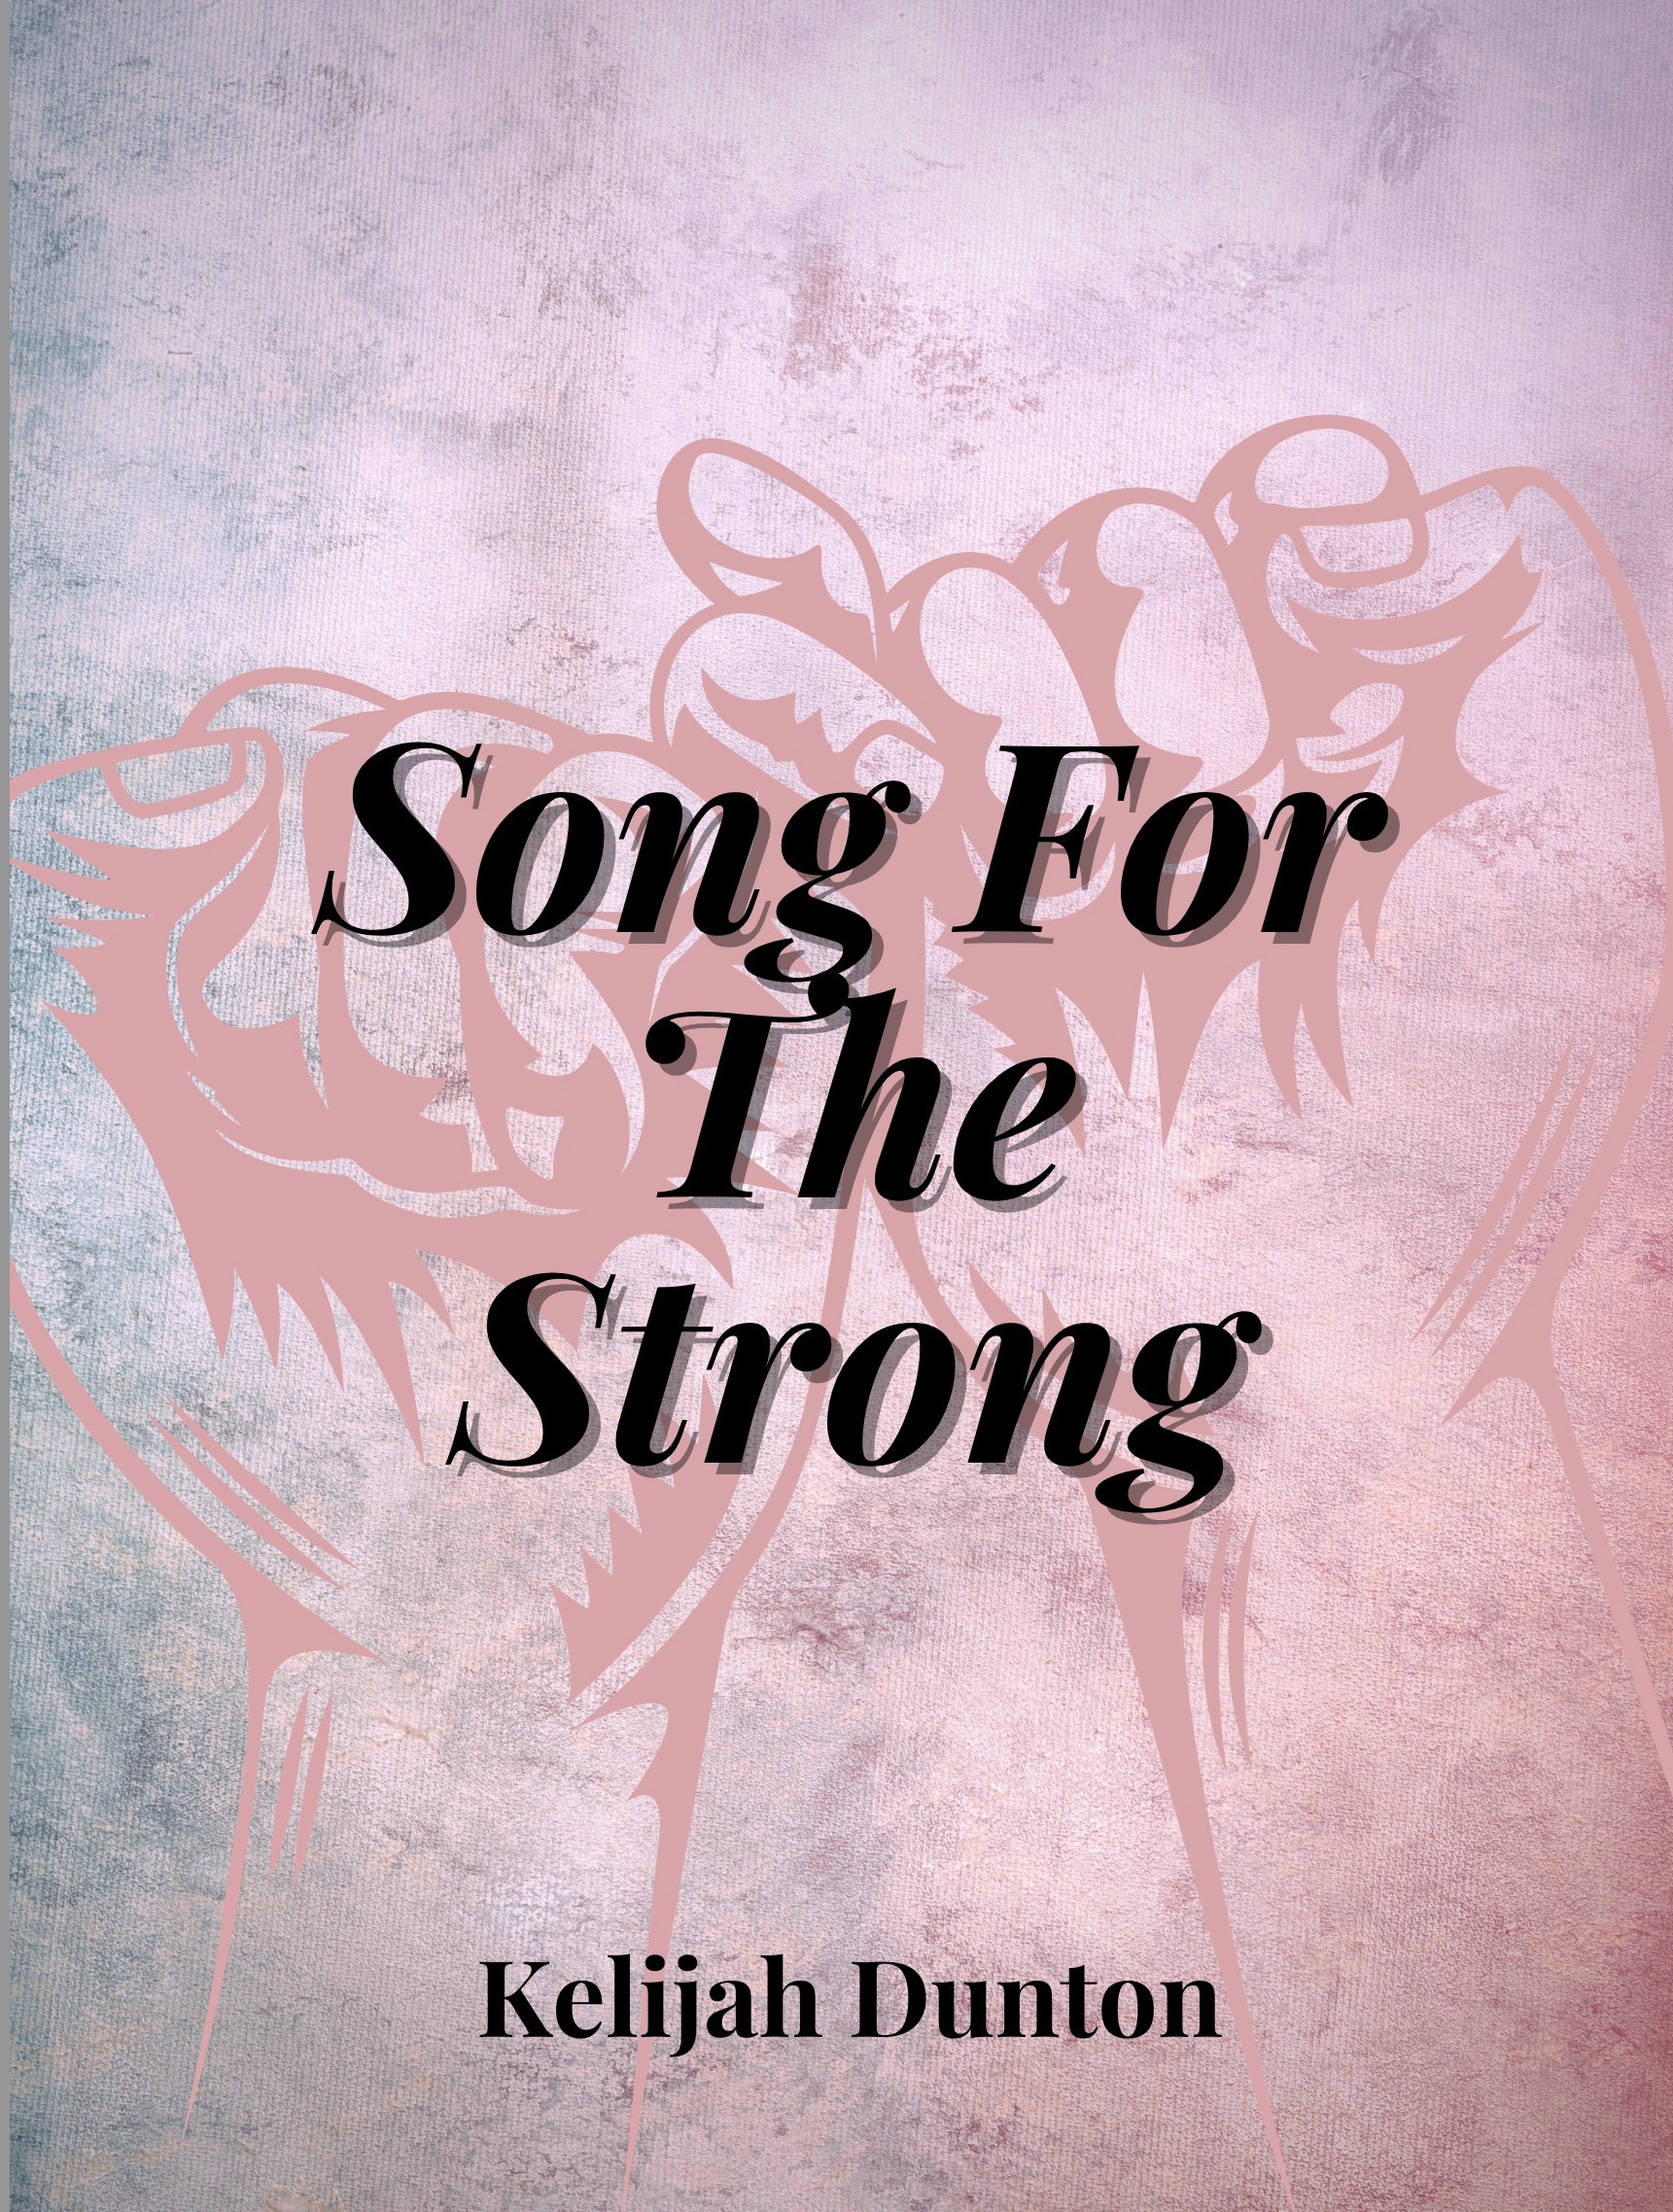 Song For The Strong by Kelijah Dunton